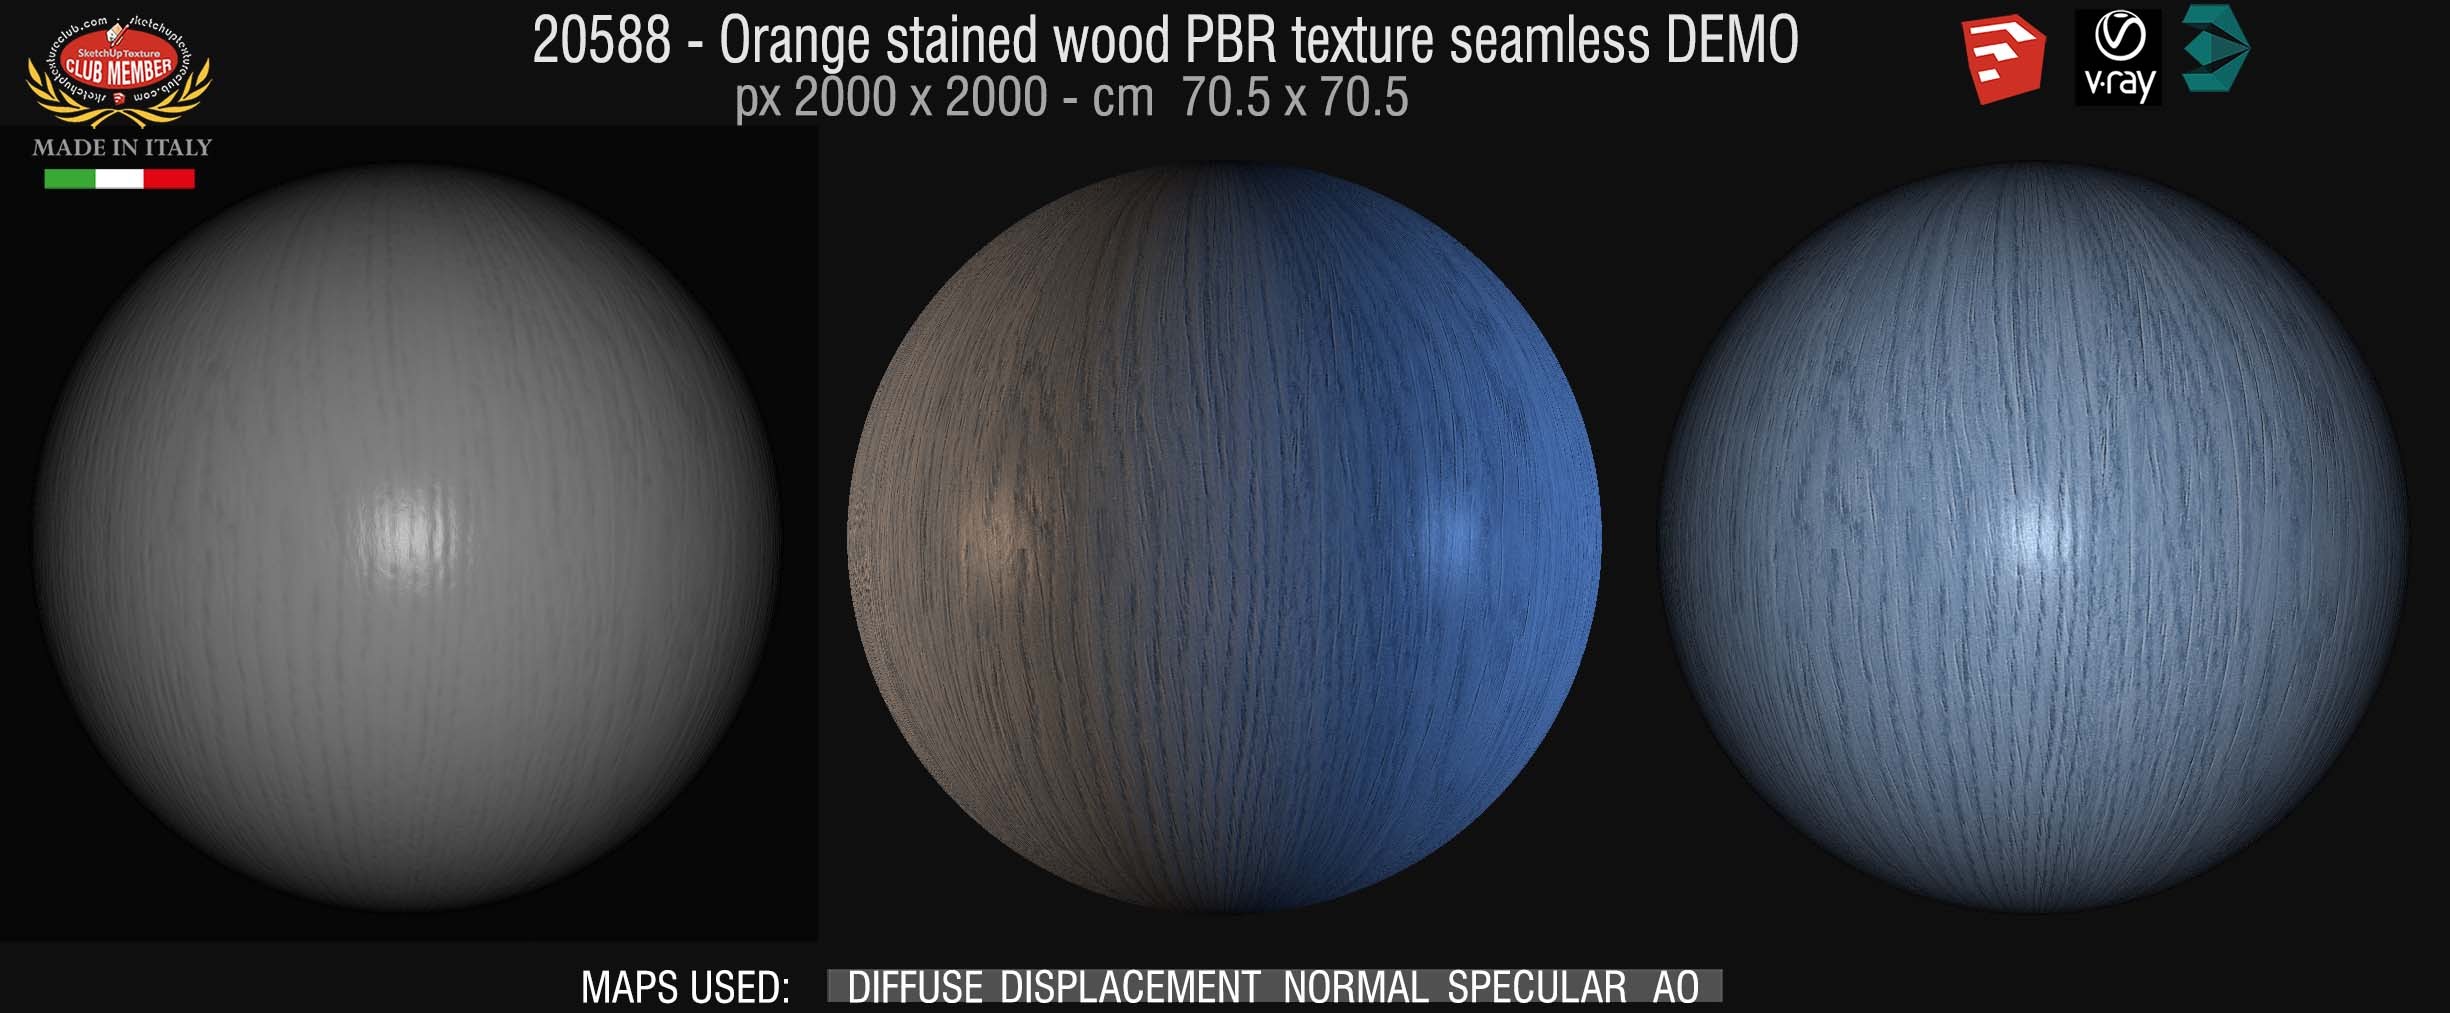 20588 light blue stained PBR wood texture seamless DEMO